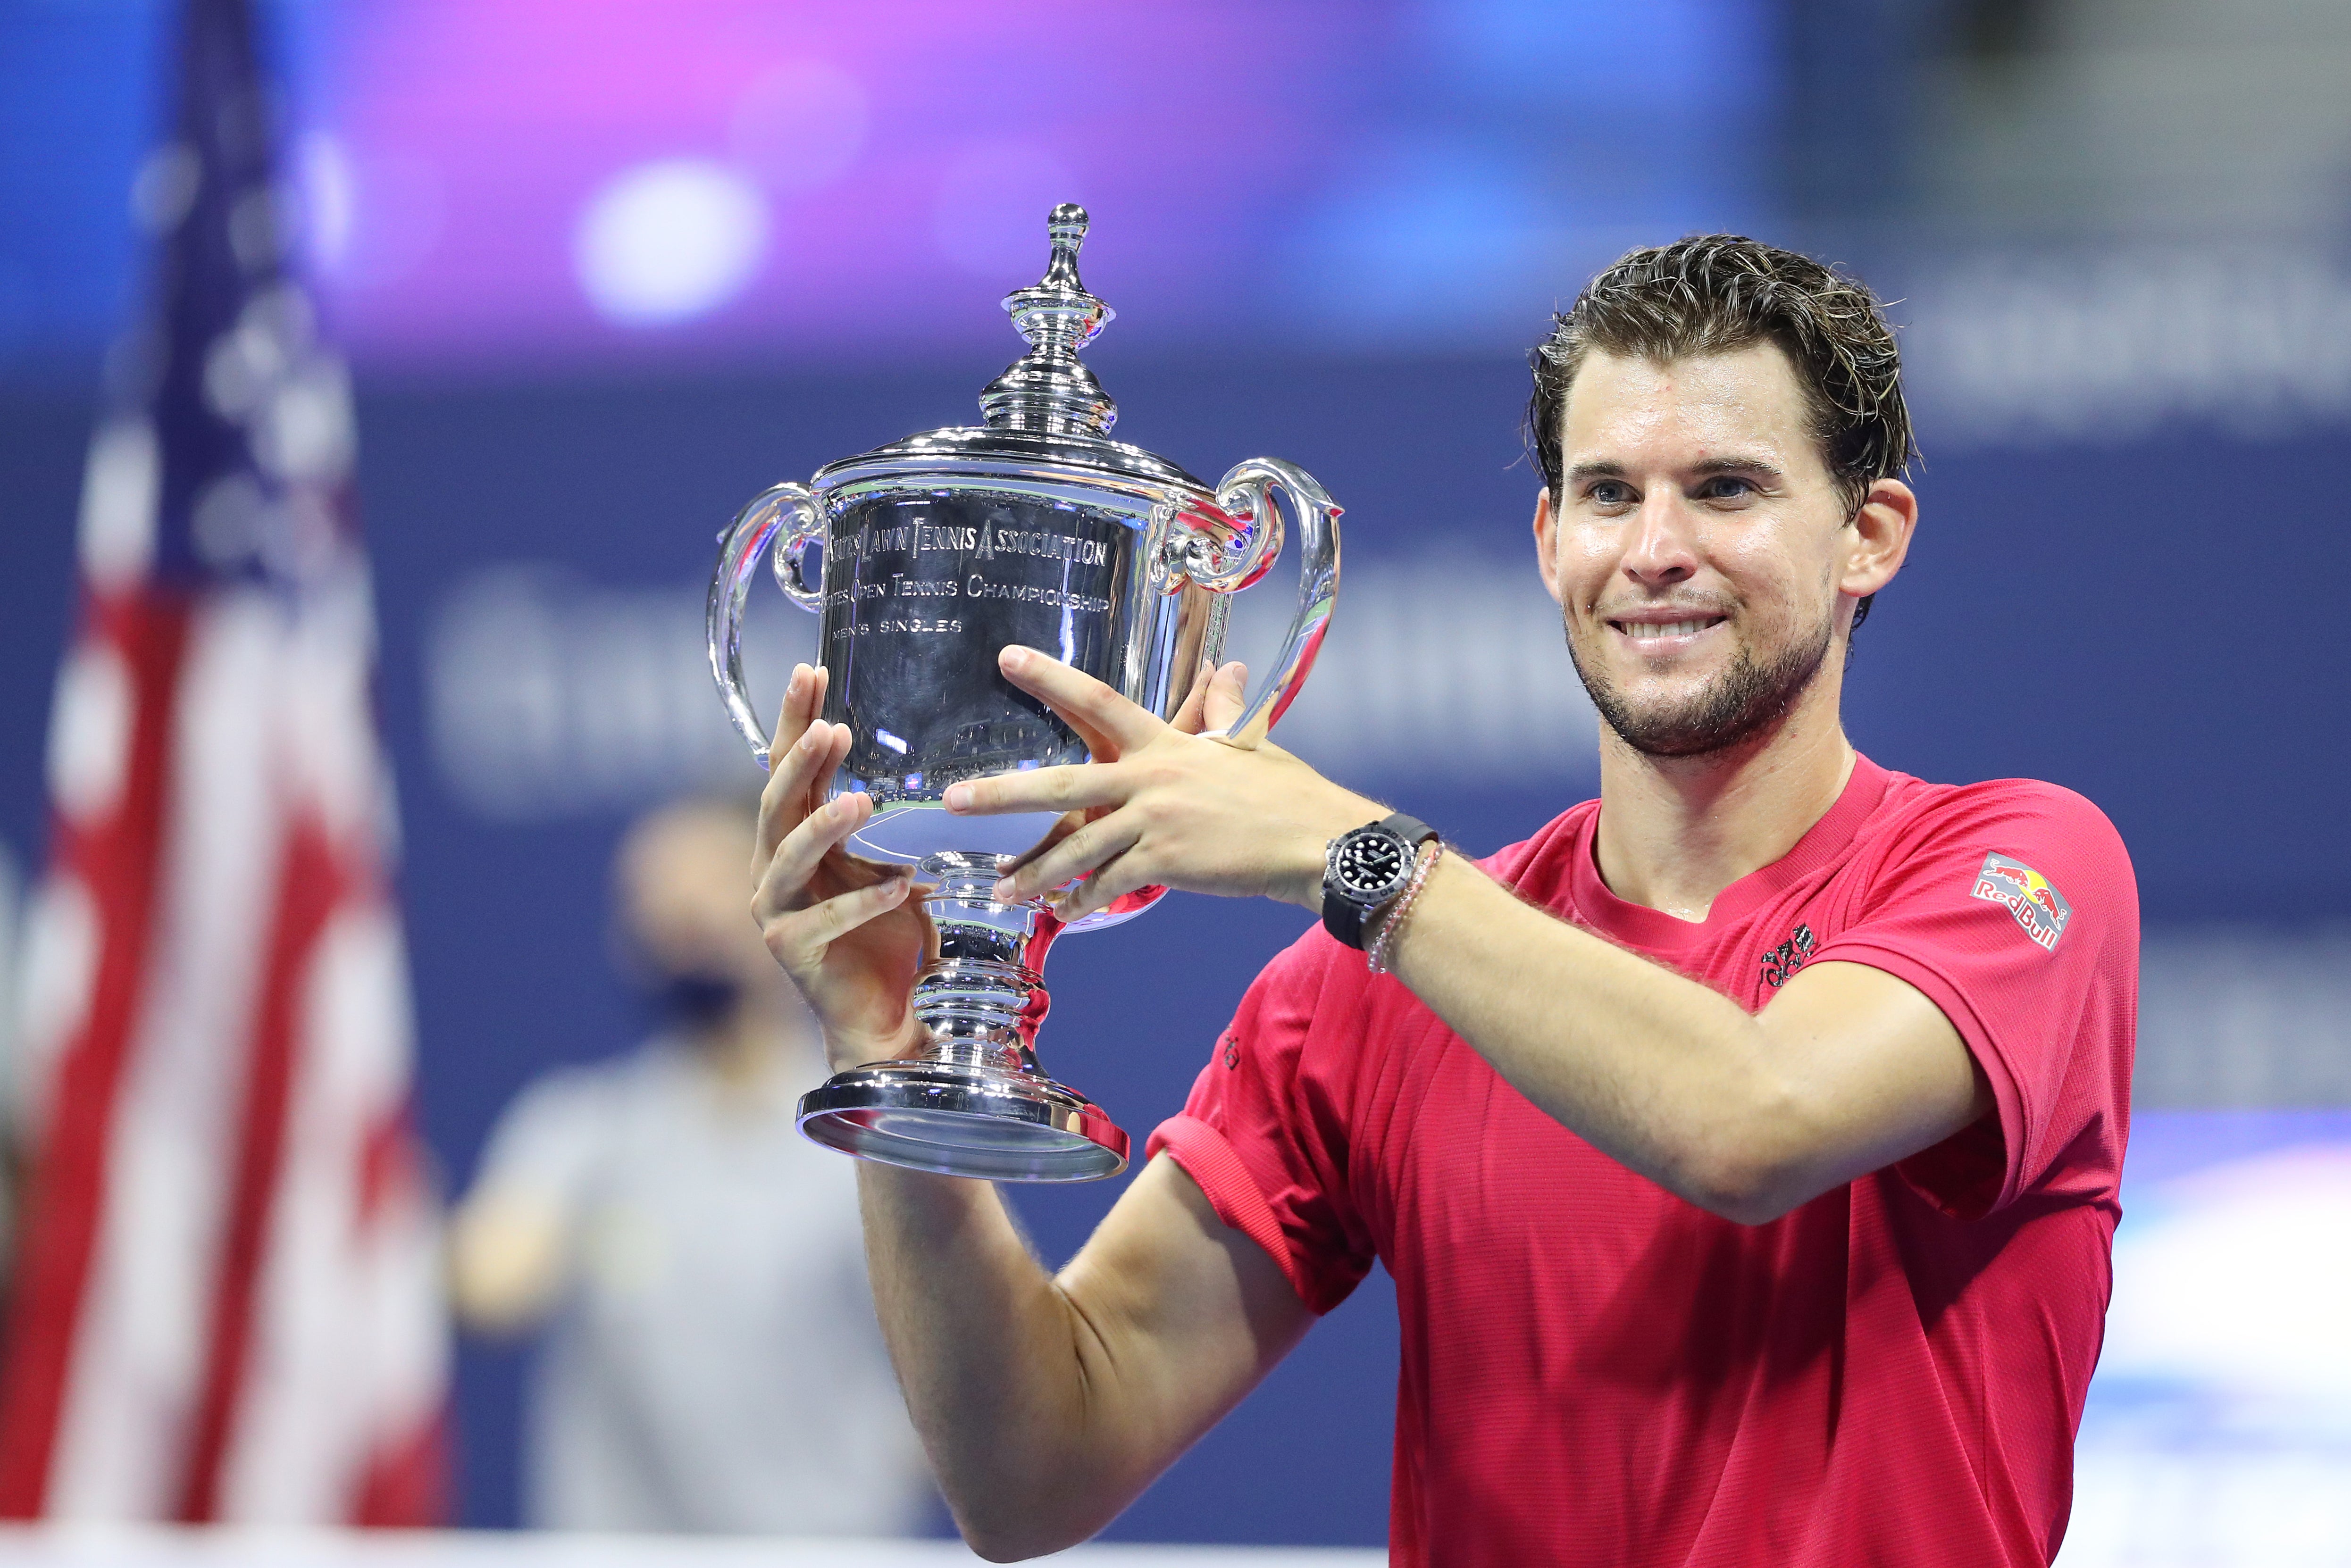 Dominic Thiem won his lone grand slam at the US Open in 2020